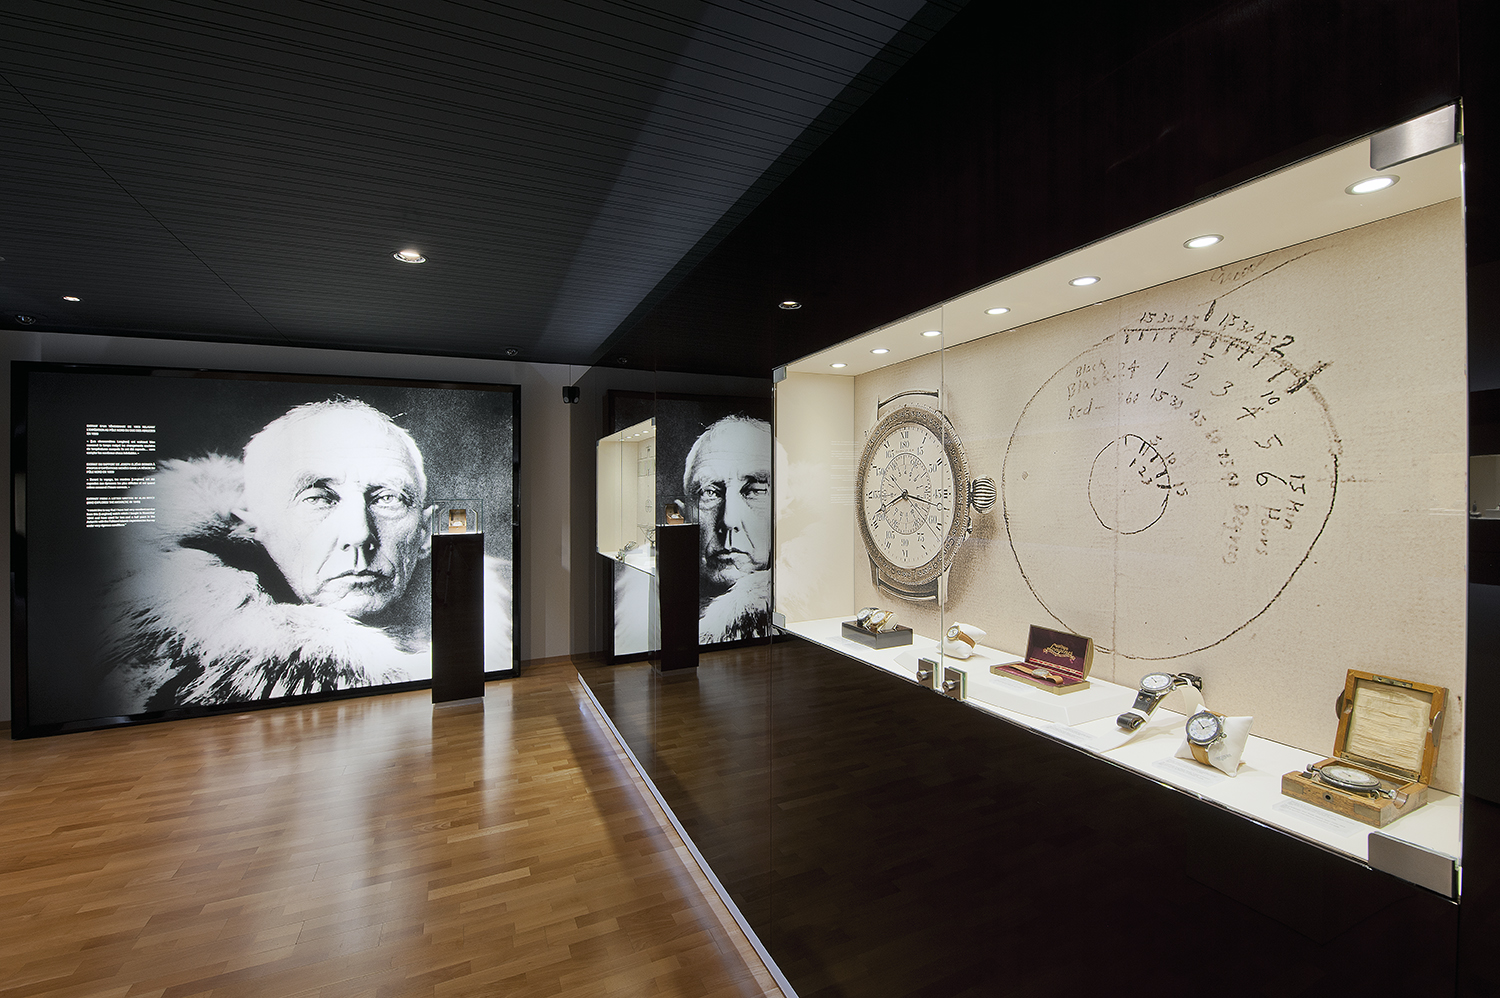 This section is devoted to adventure and the pioneering spirit. The brand's products were part of various adventures across the globe. Charles Lindbergh, Philip van Horn Weems, Roald Amundsen, Amelia Earhart and Paul-Emile Victor, among others, were able to use the brand's expertise to conquer the air, the oceans or the land.